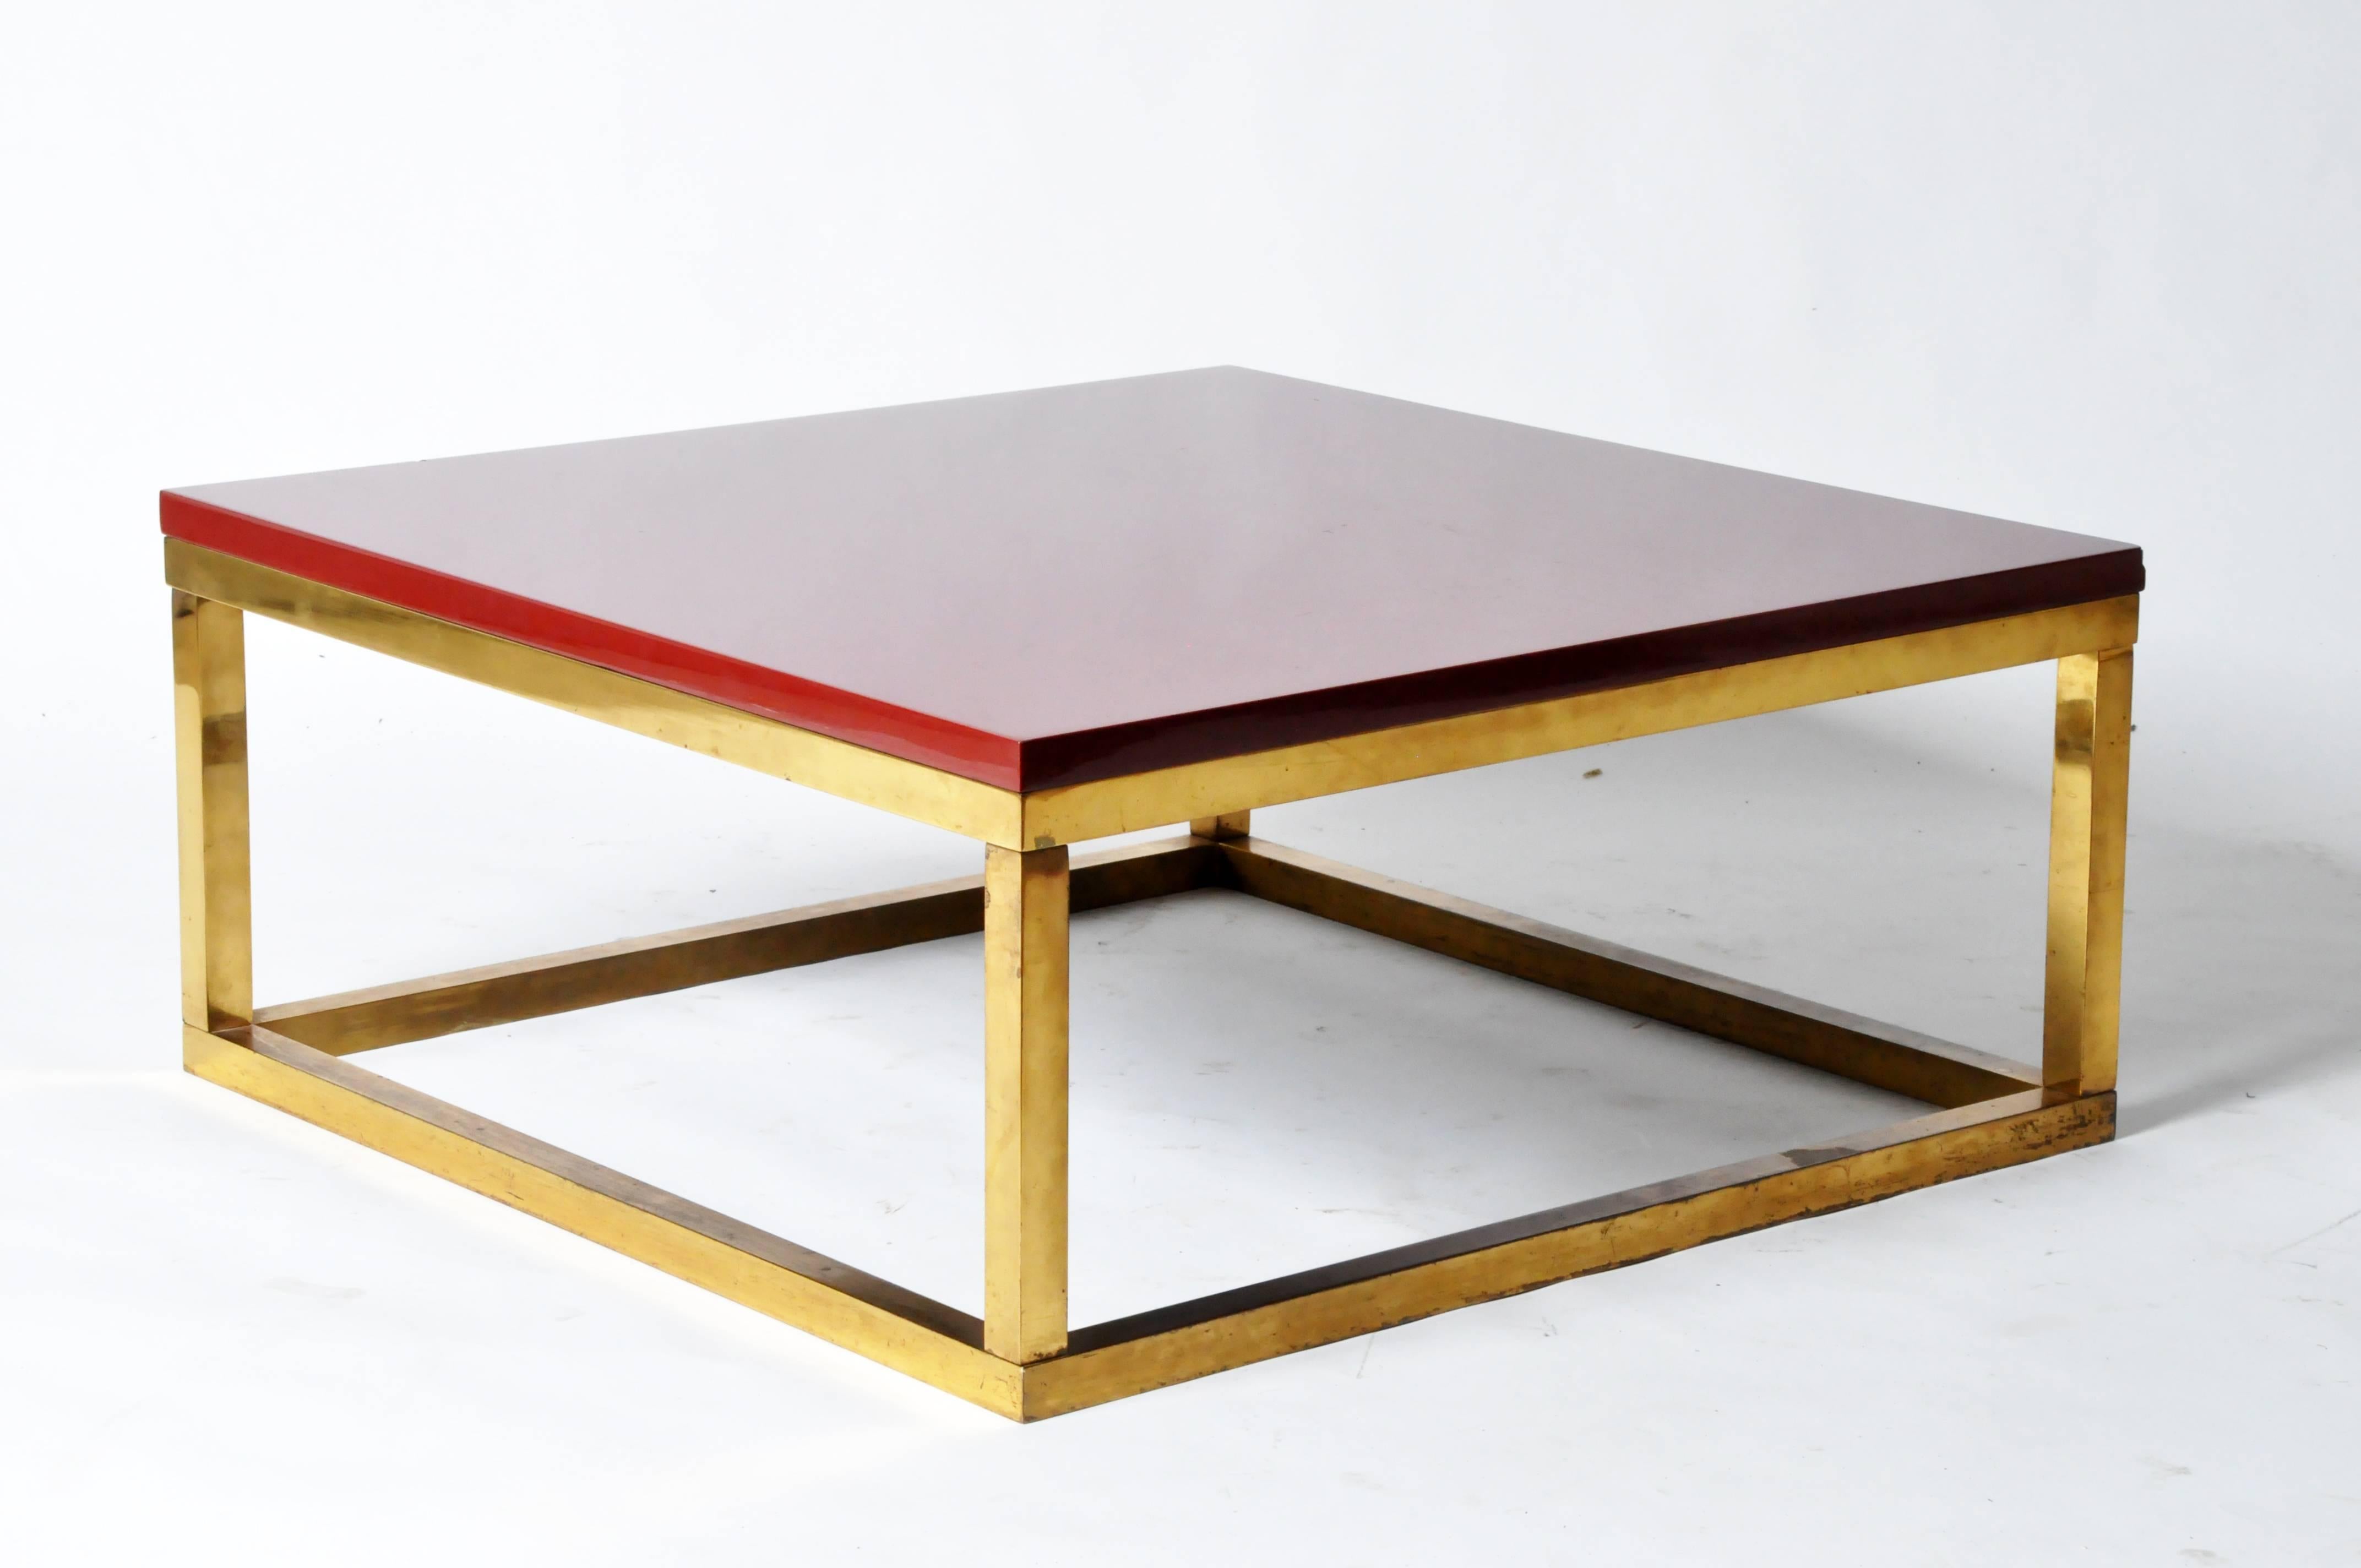 This handsome cube-like coffee table features a bright red top supported by rectangular brass frame, which is joined by base stretchers.